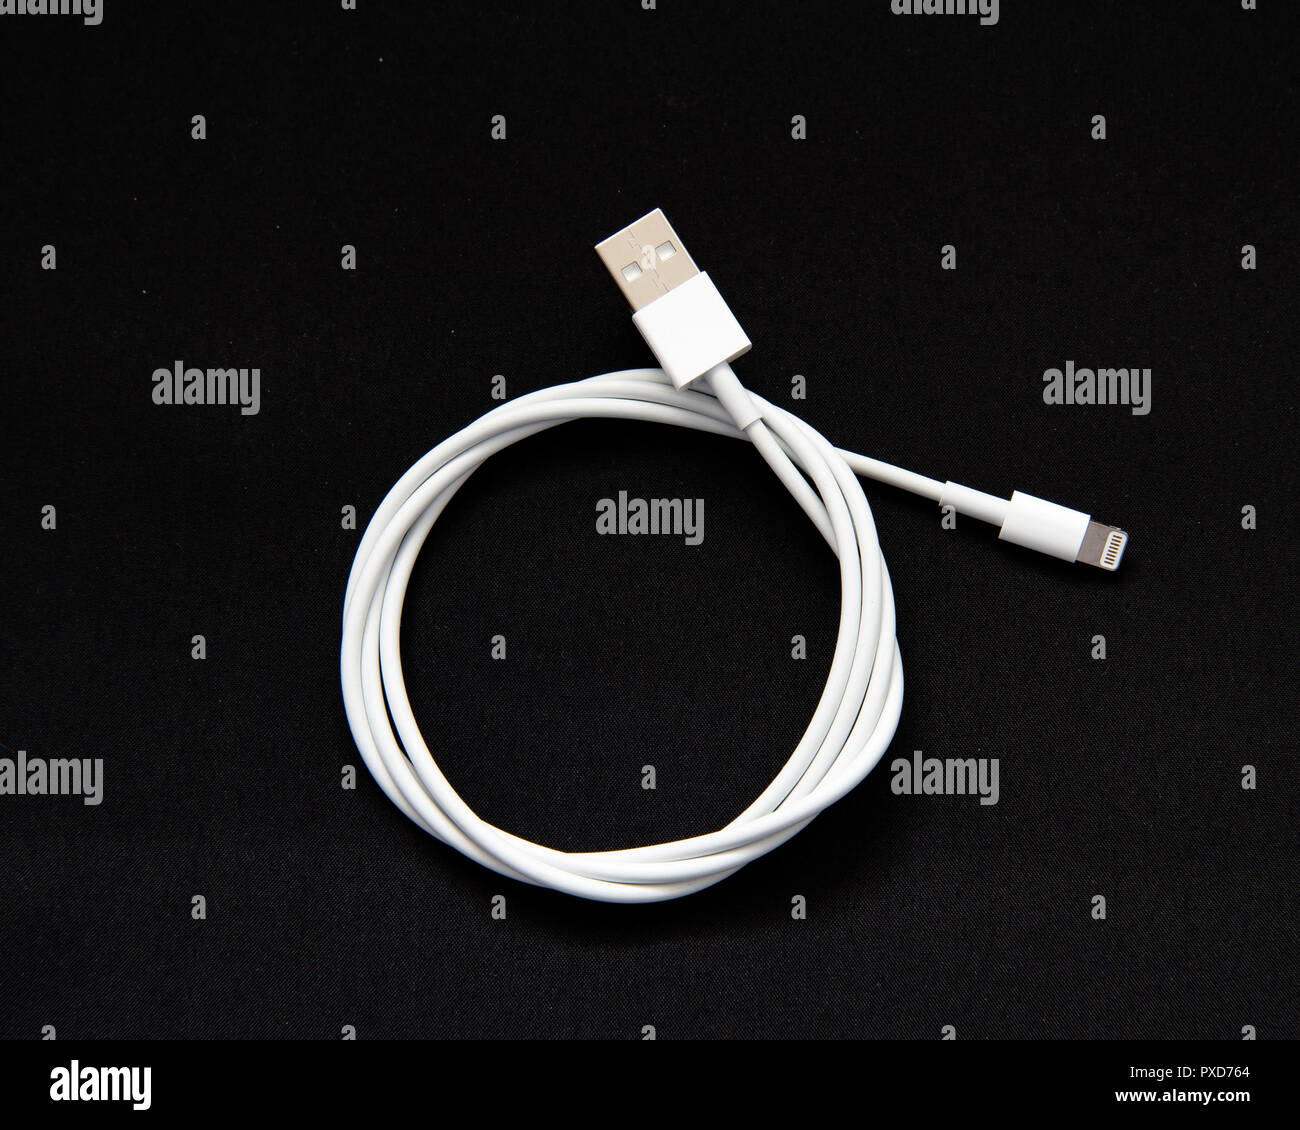 A white USB computer cable with an Apple lightning connector isolated on black. Stock Photo